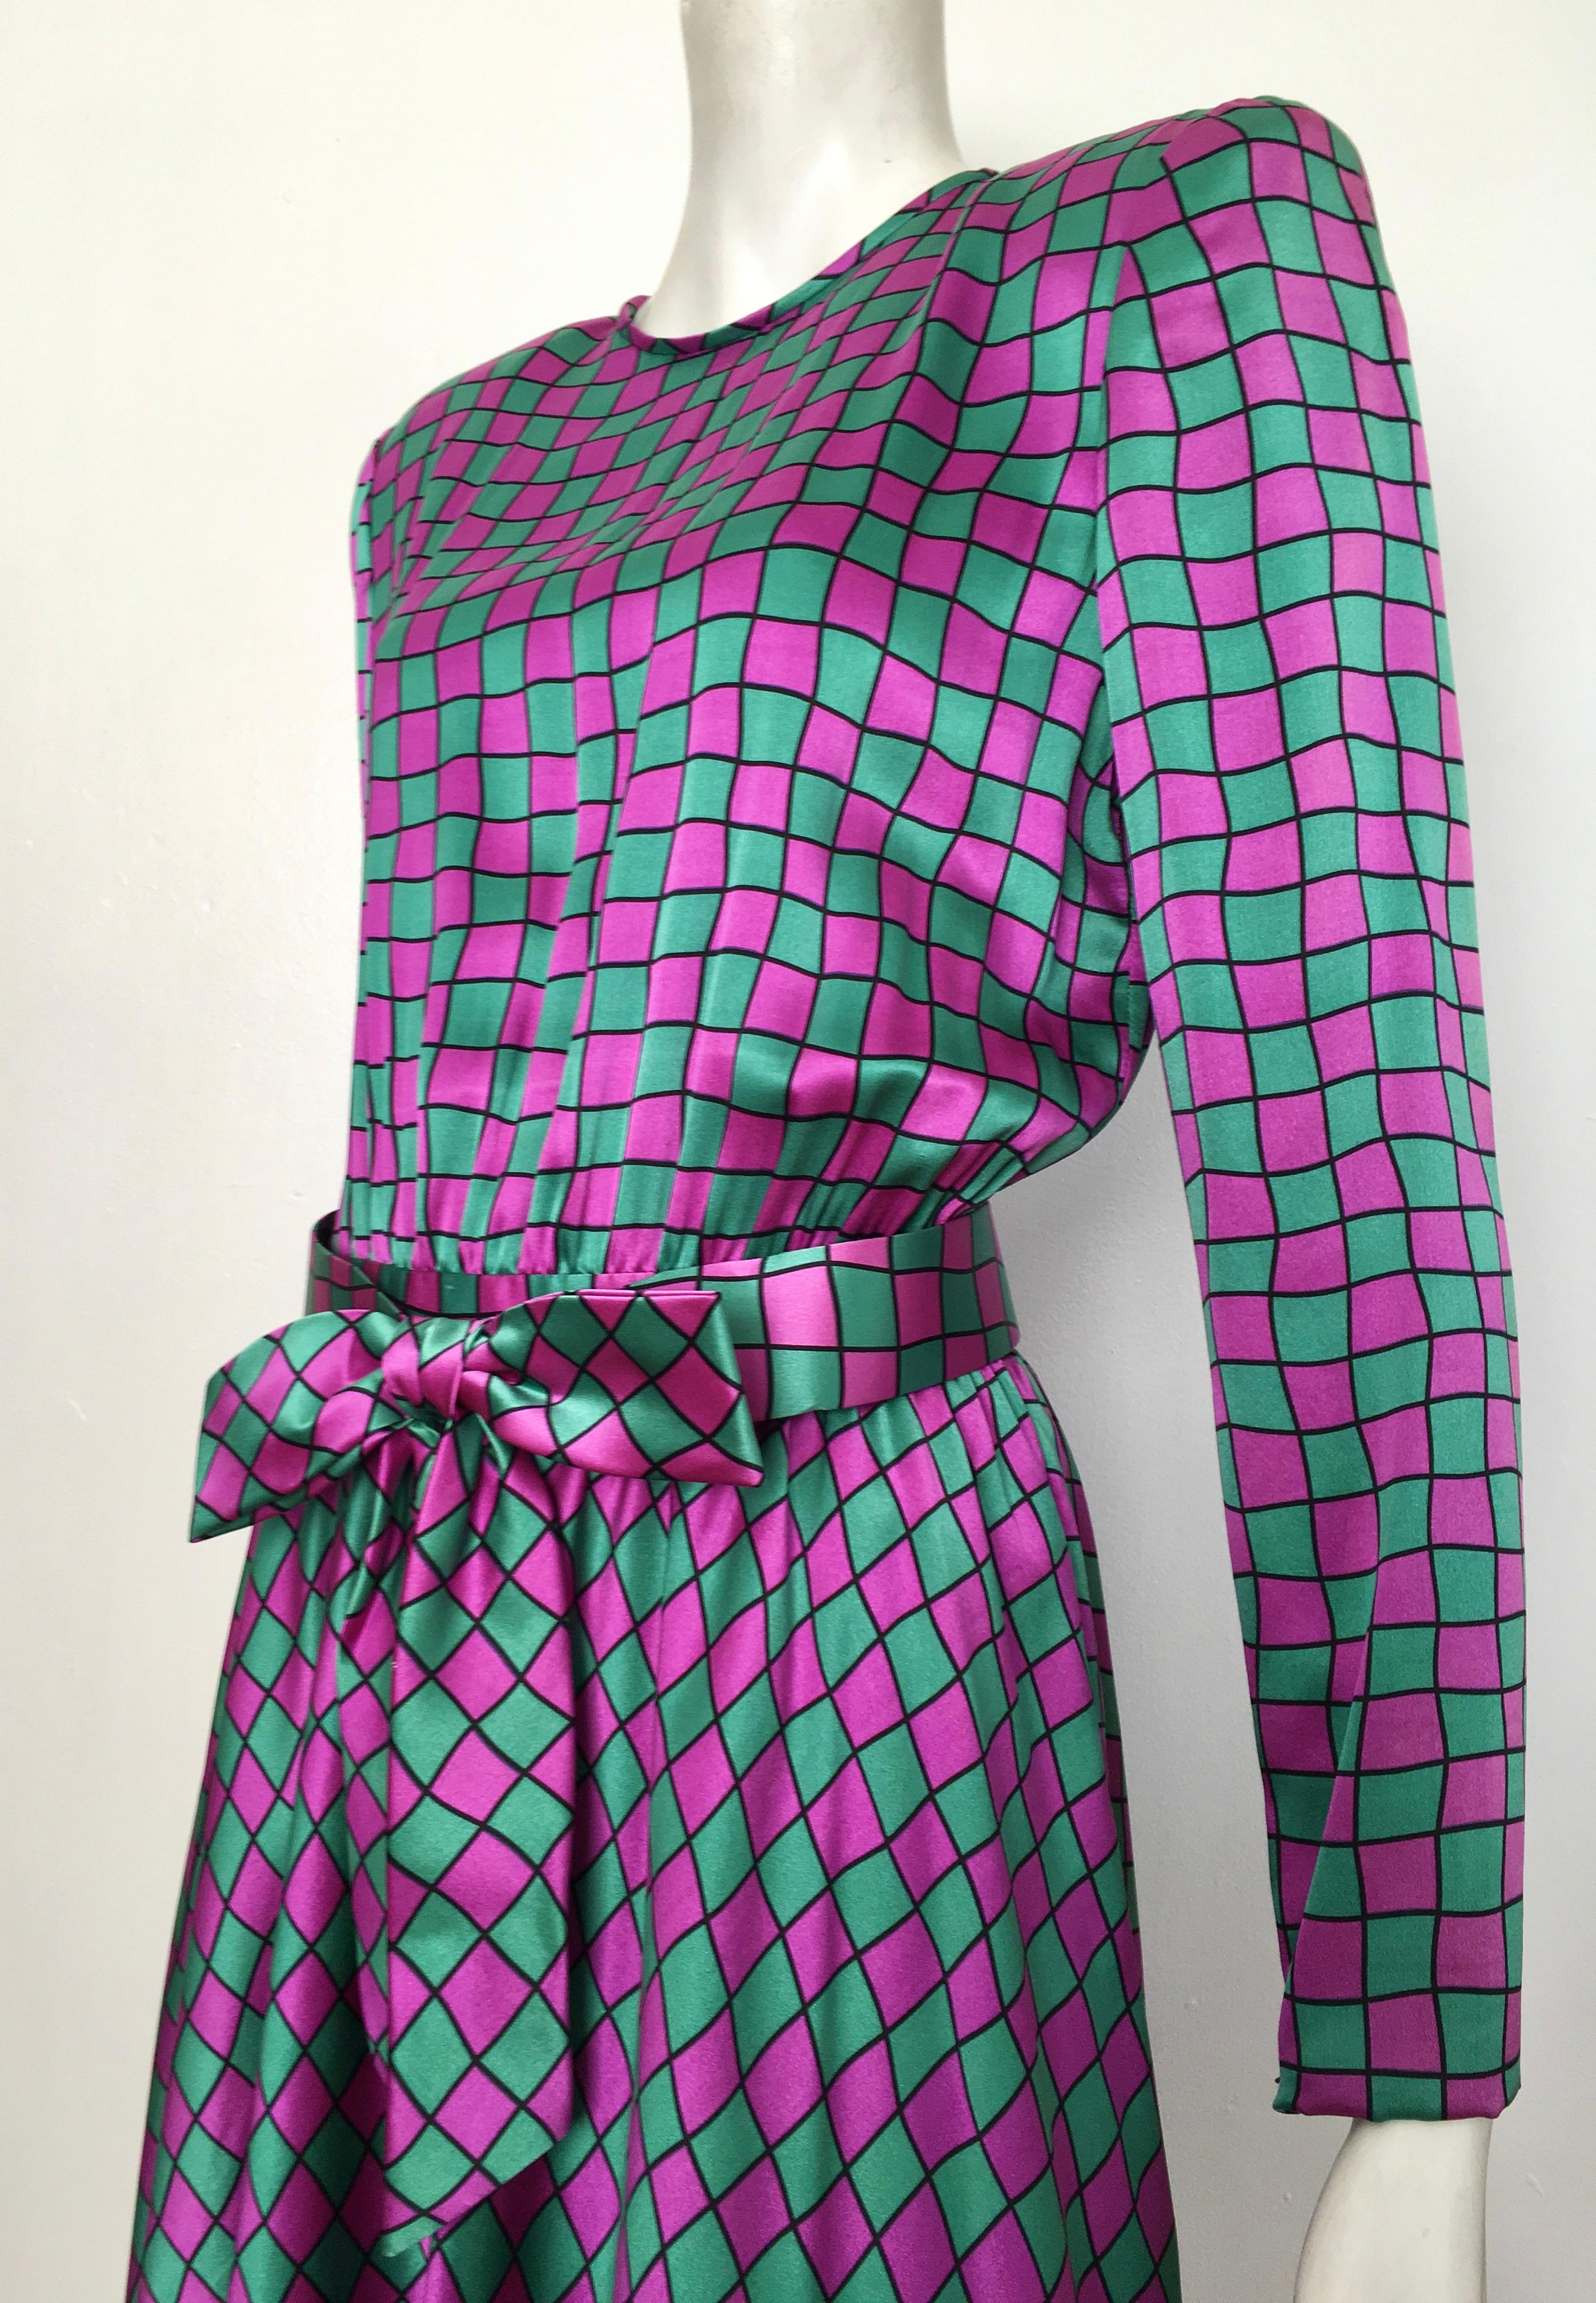 Stanley Platos Martin Ross Silk Evening Dress with Belt, 1980s  In Excellent Condition For Sale In Atlanta, GA